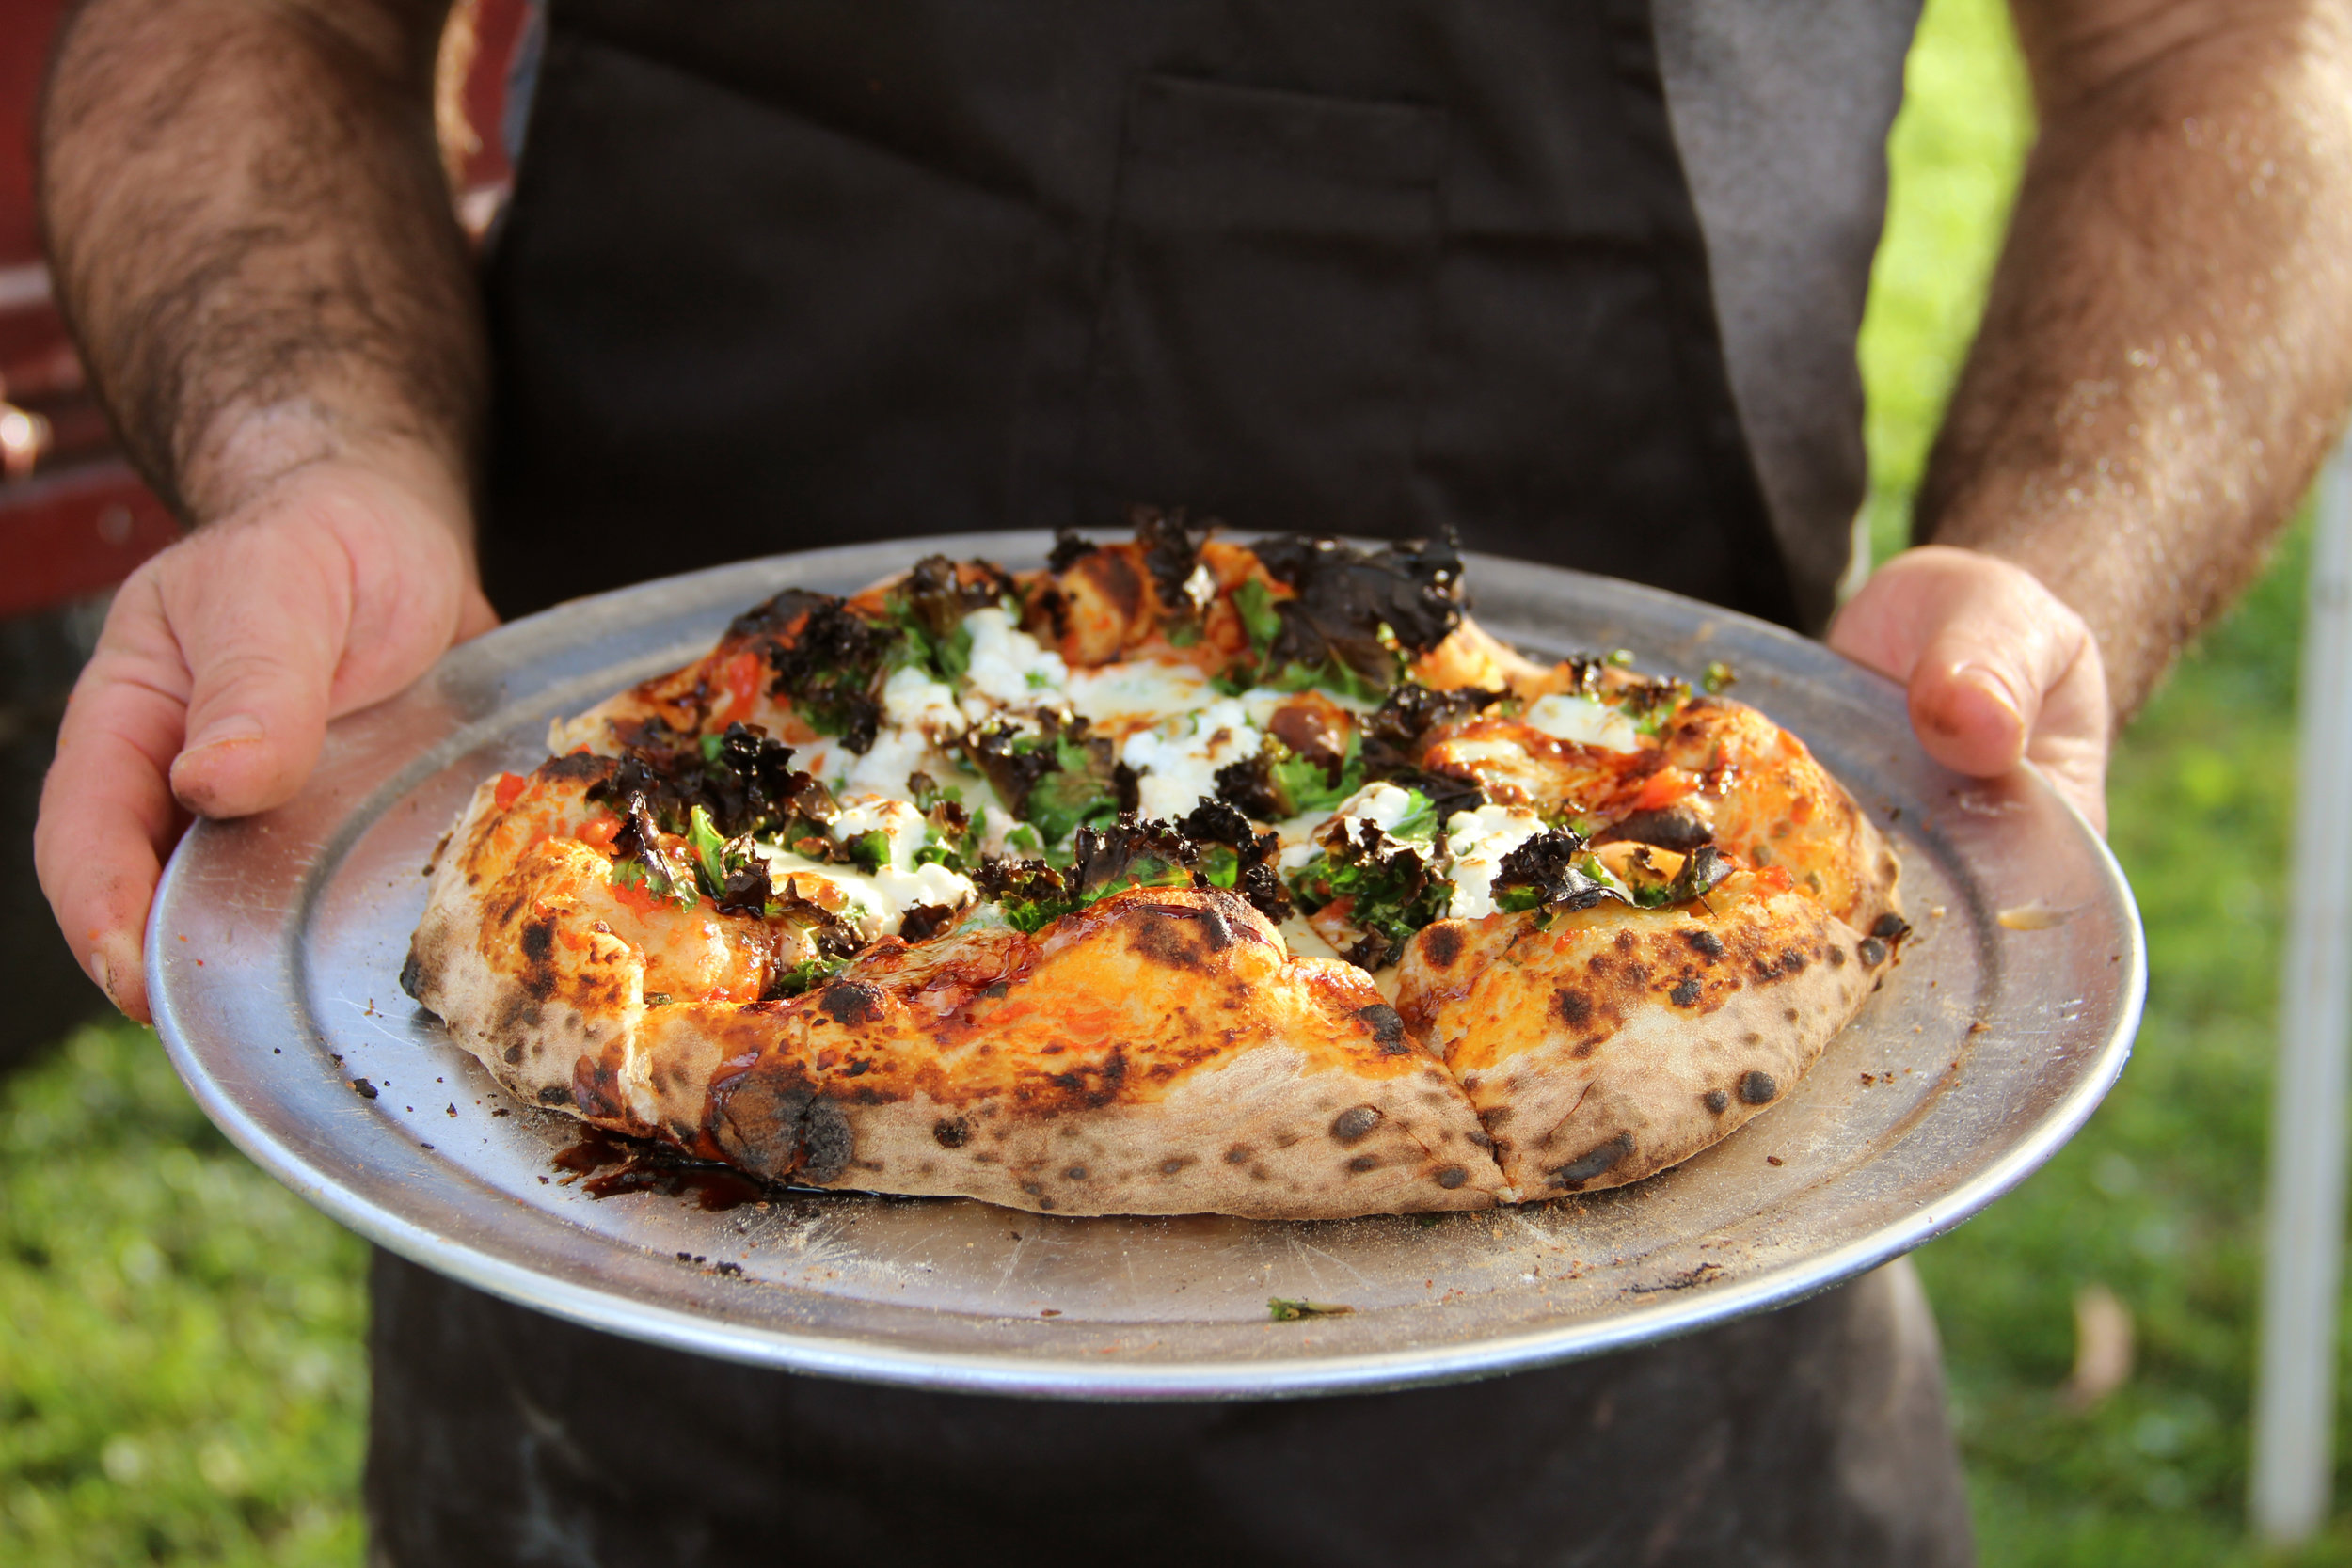 Doug Cullen Wood Fired Fermented Pizza Truck Catering Events Weddings Hudson Valley Westchester Hastings on Hudson NYC Sourdough.jpg